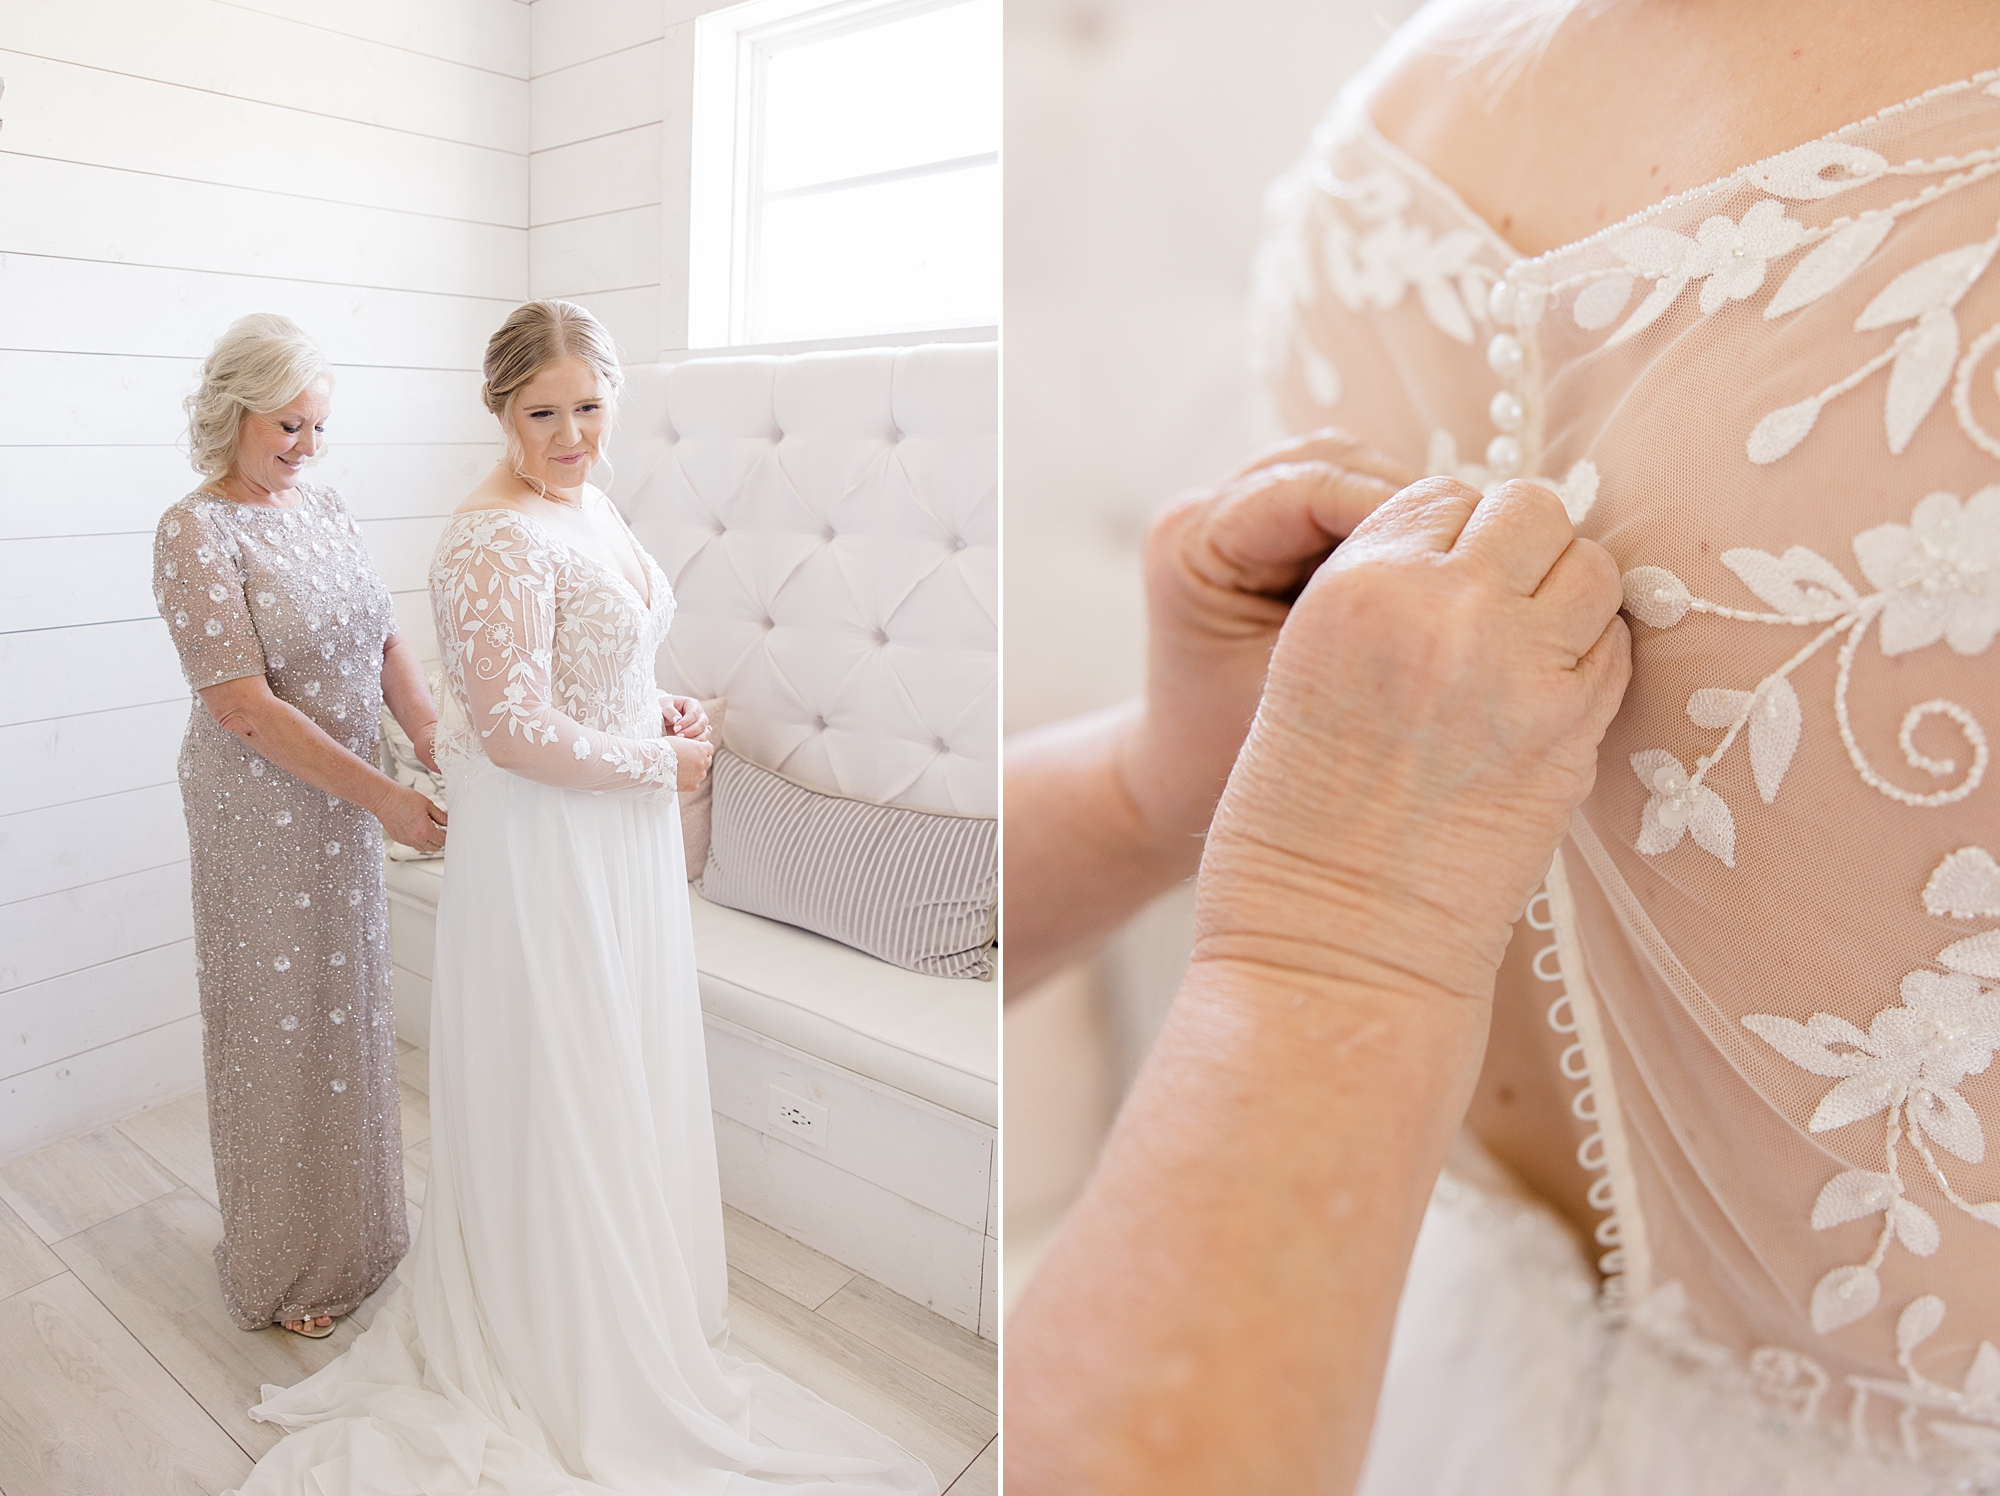 mother helps bride with buttons on wedding gown